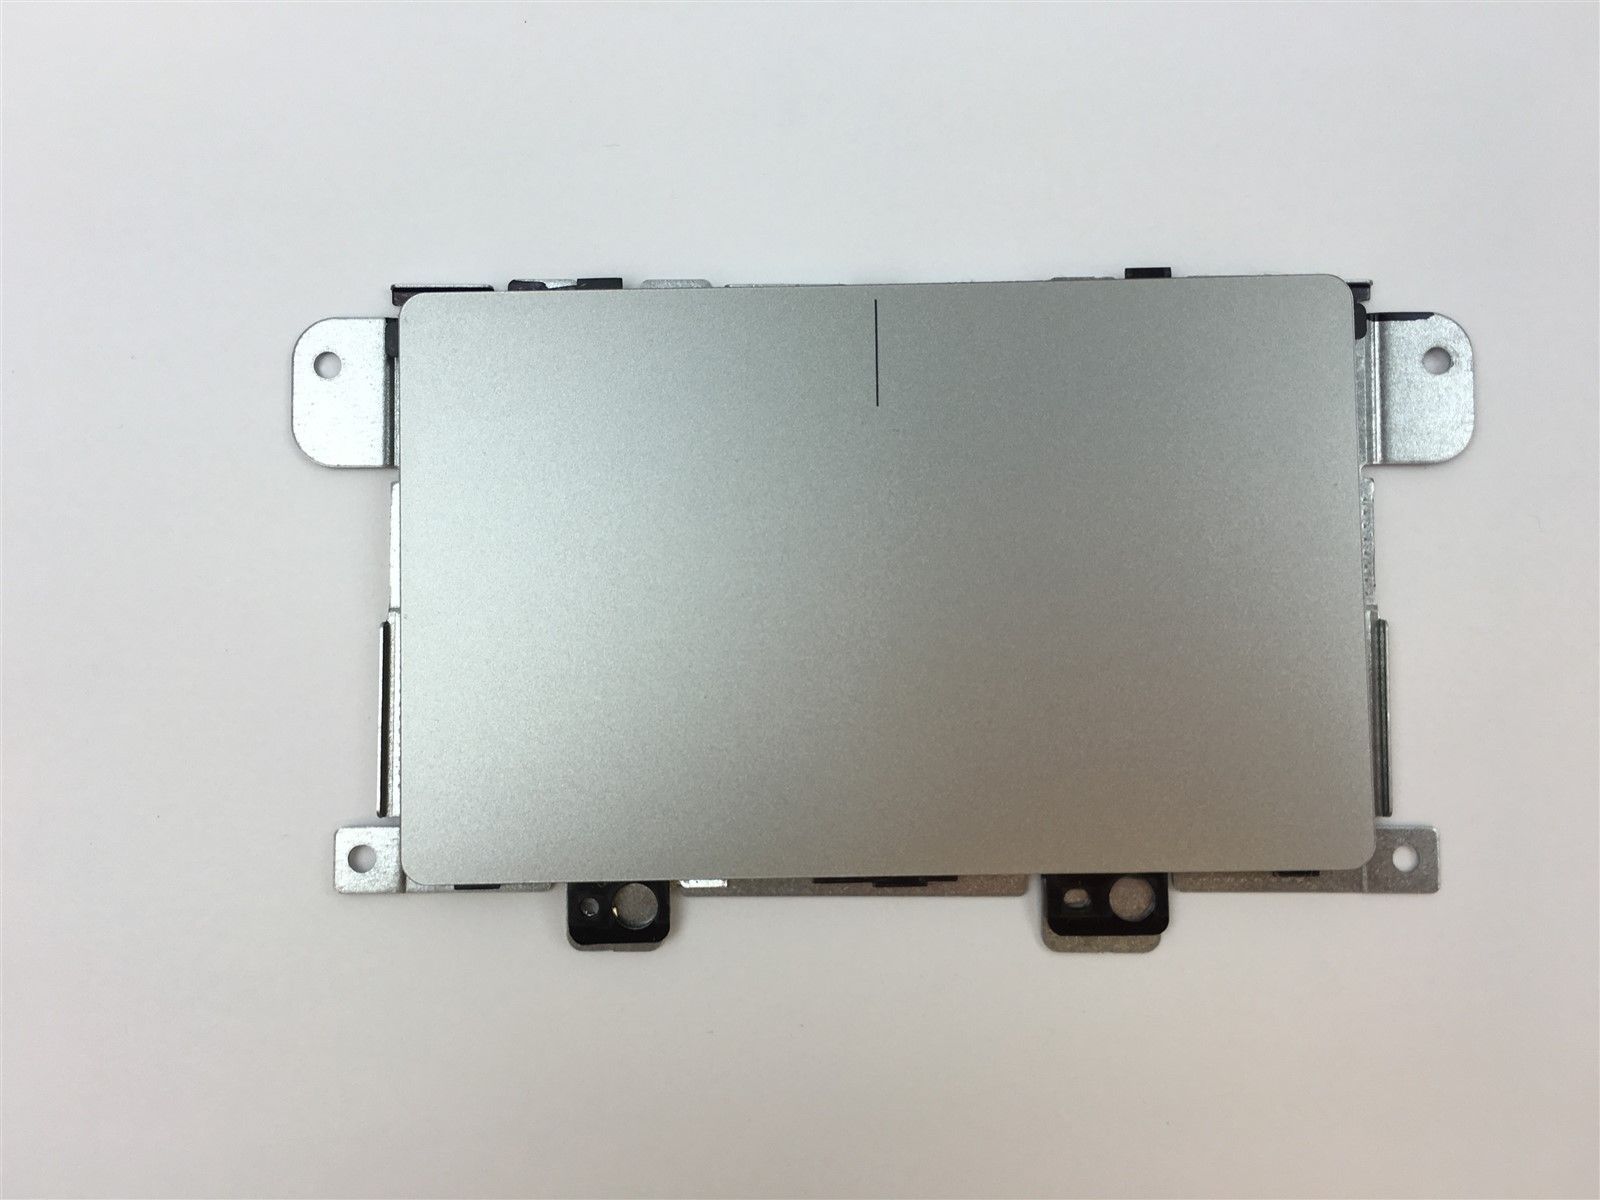 Genuine Dell Inspiron 7348 13-7000 Series Laptop Touchpad Assembly A133L6 XVY5G